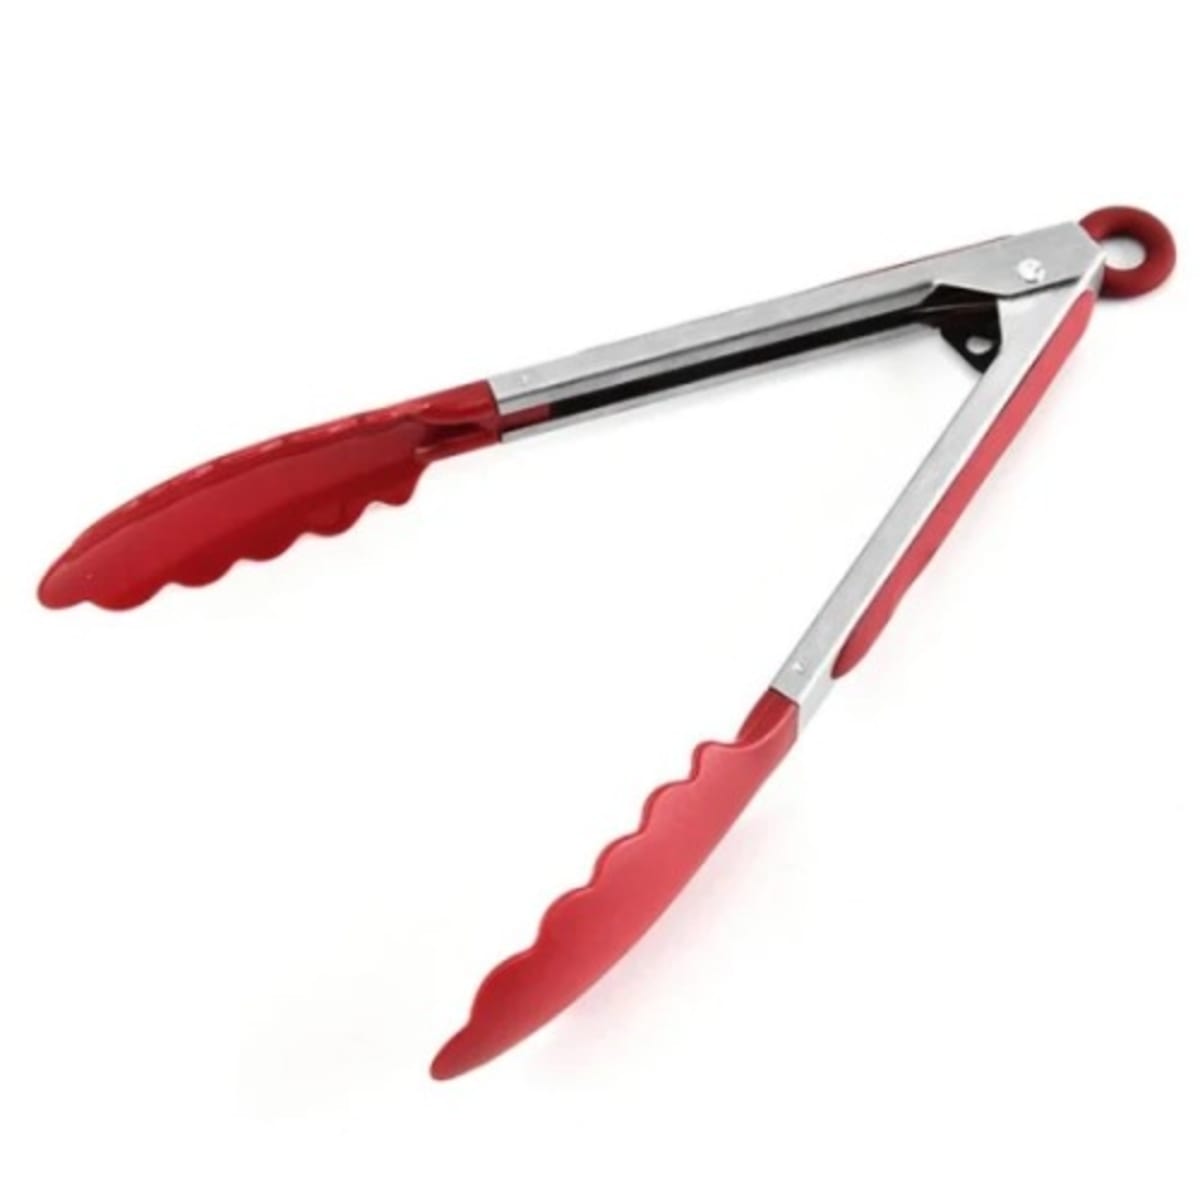 China Stainless Steel Kitchen Tongs 9 | Po Wing Online